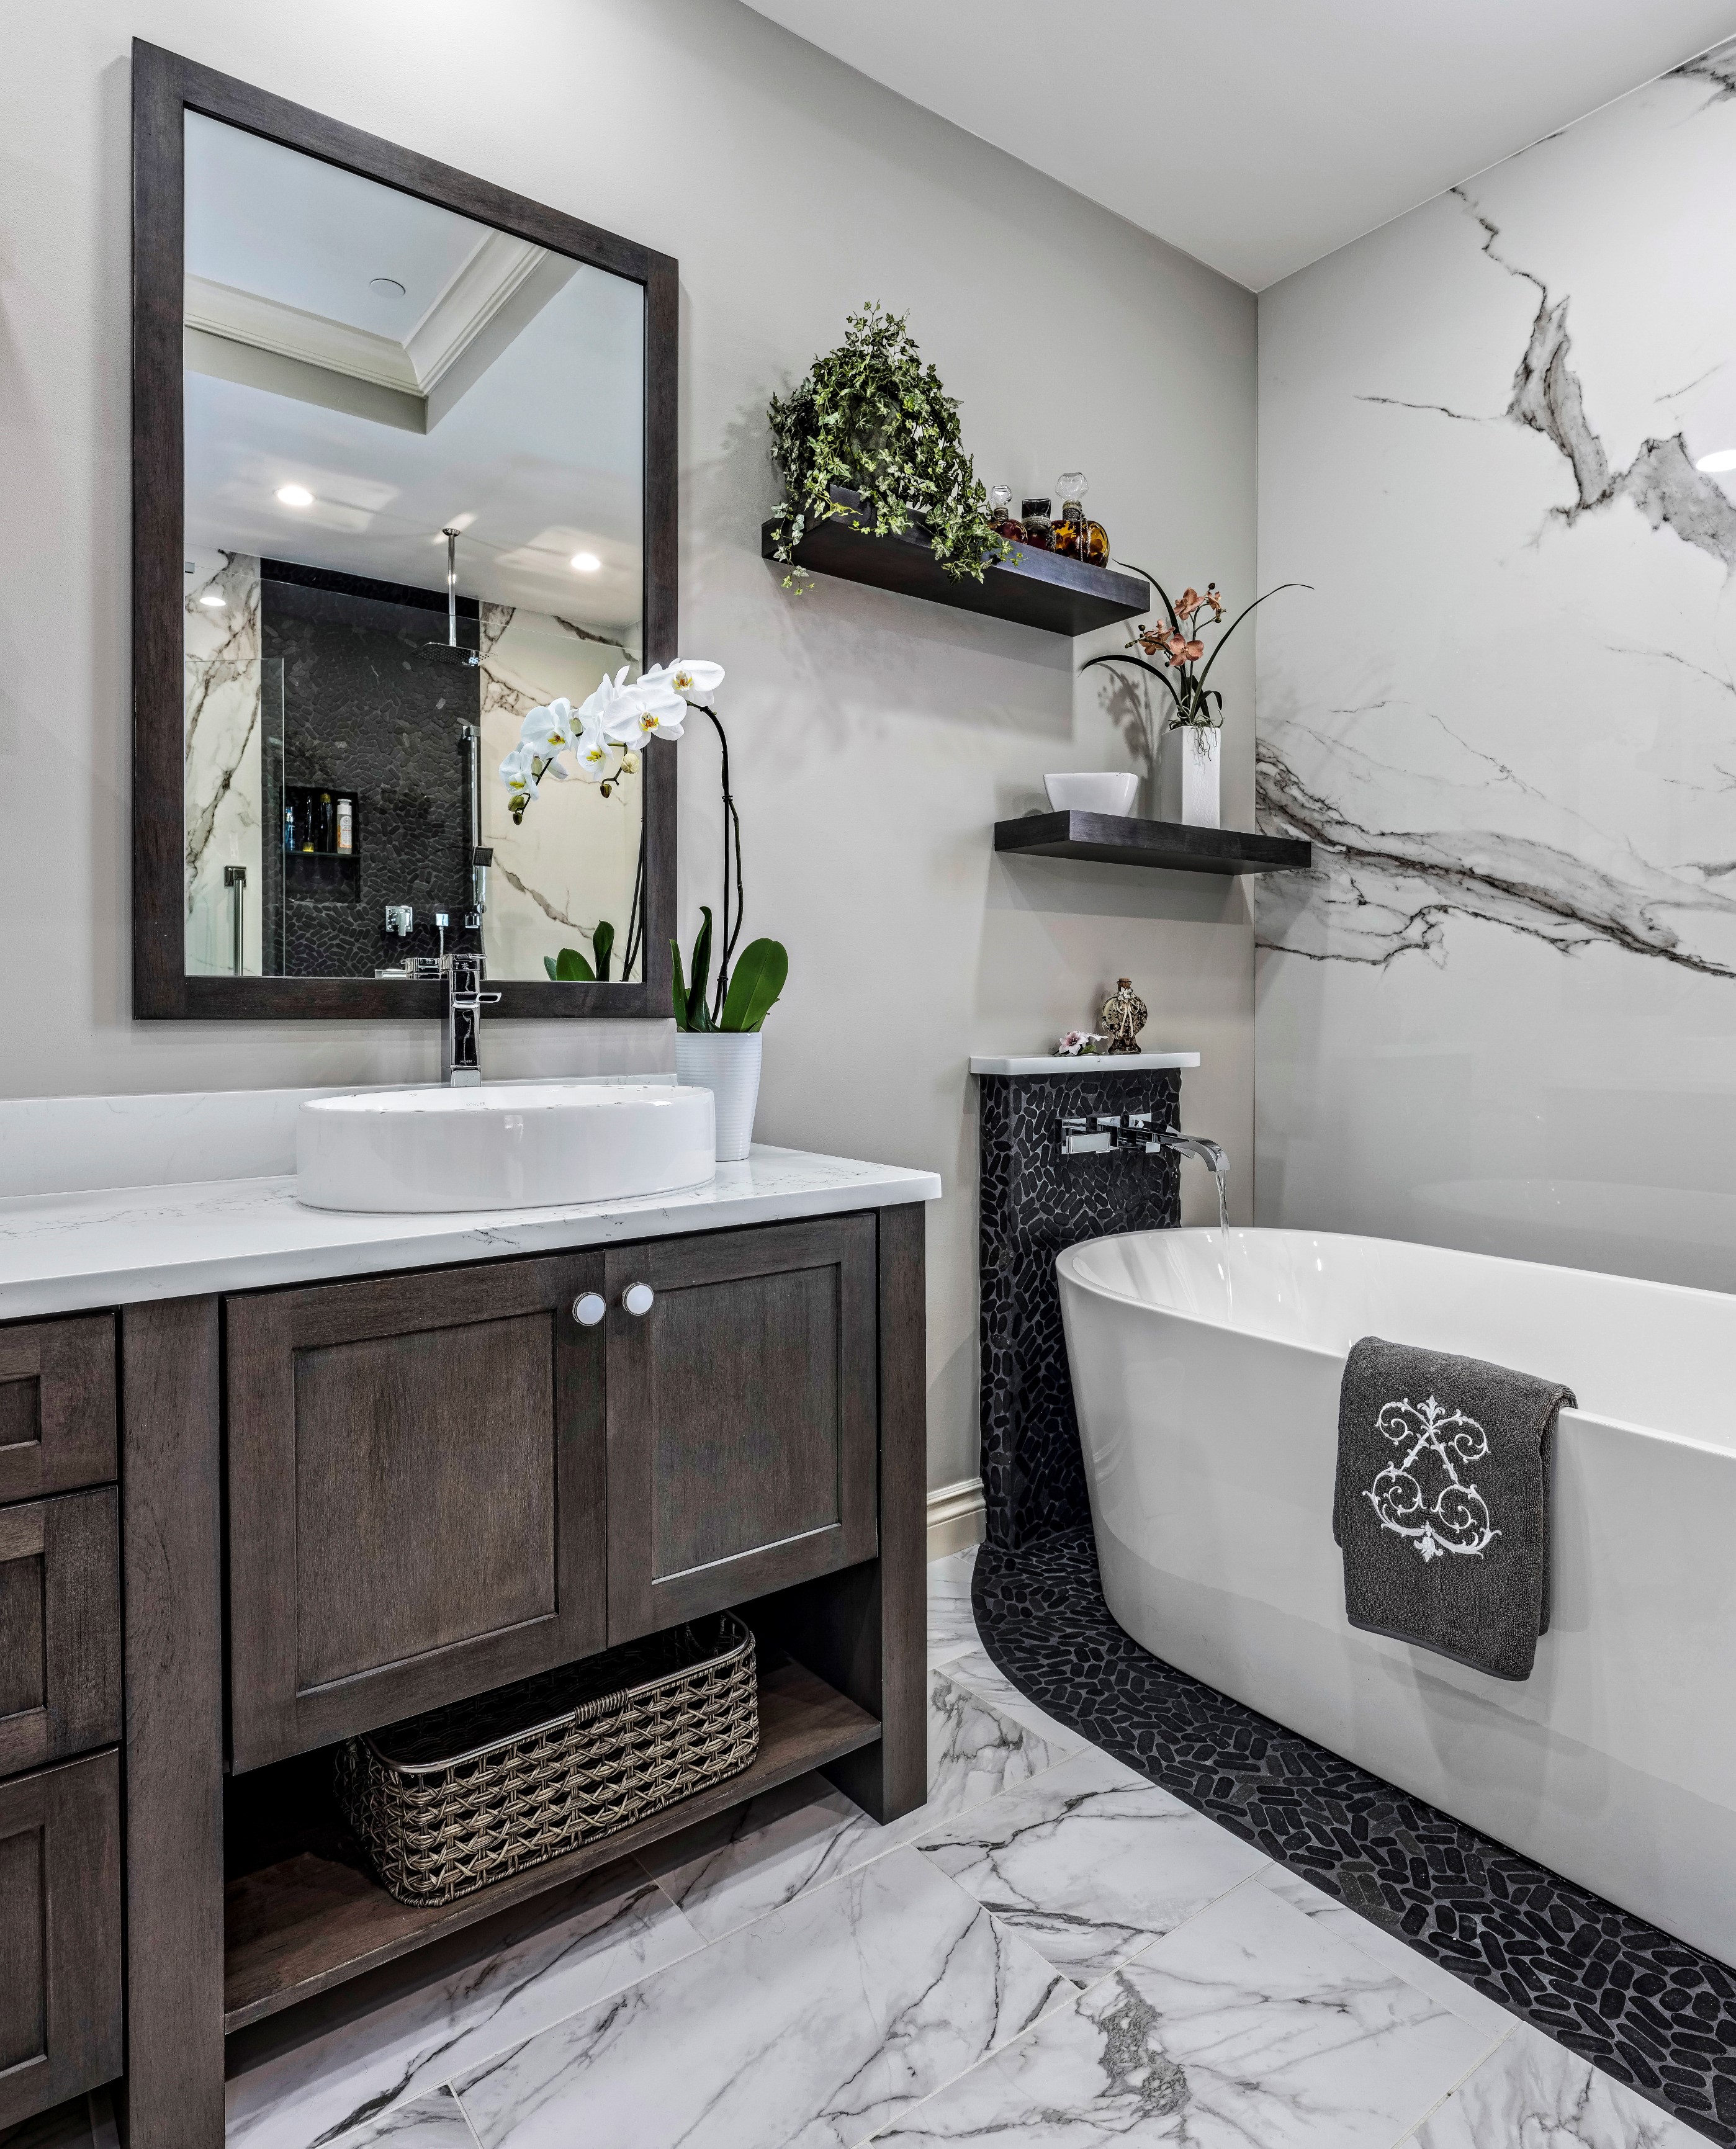 Bathroom Remodeling Typically Cost, How Much Does It Cost To Redesign A Bathroom